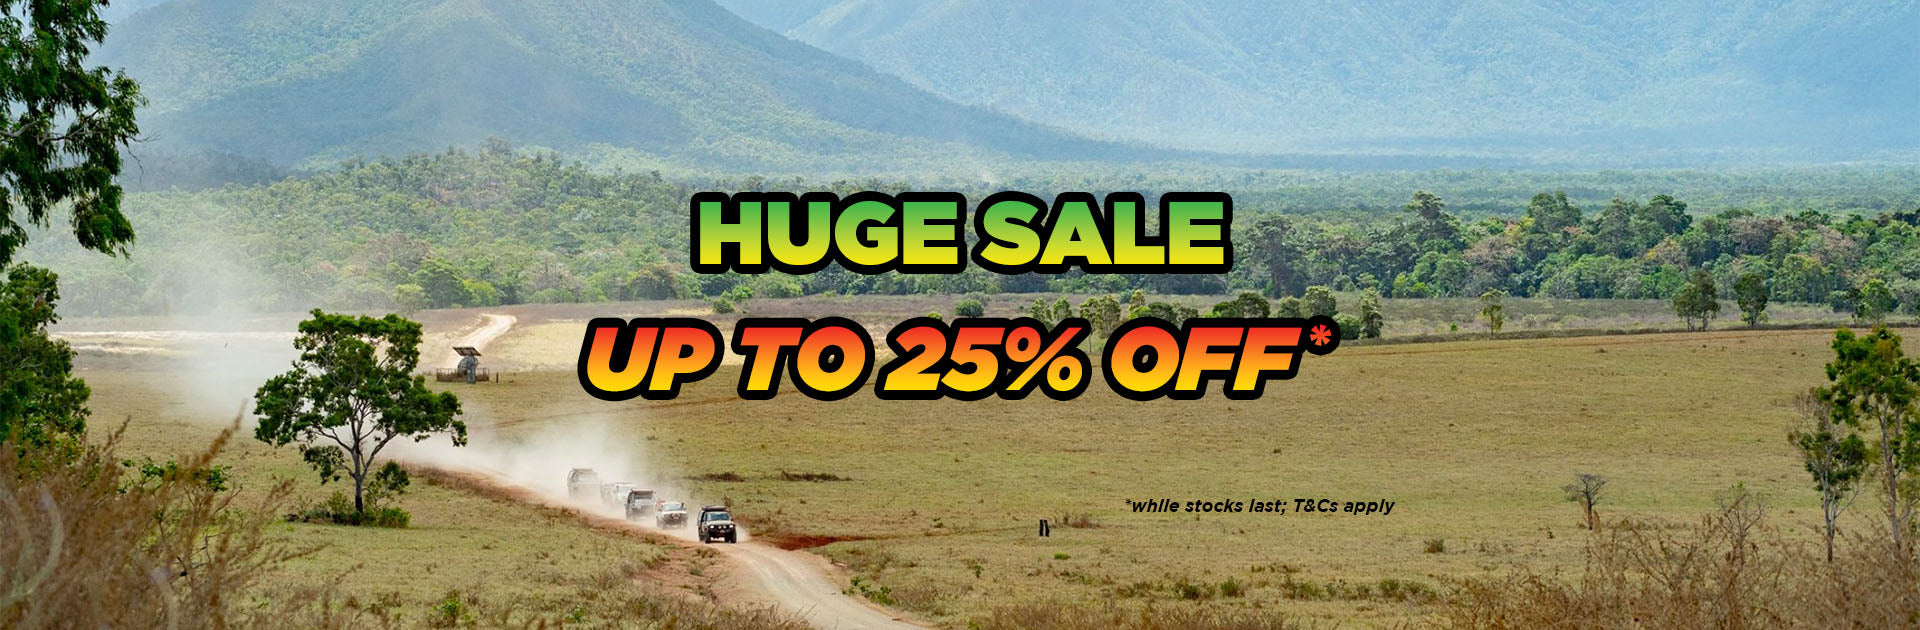 4WD 24/7 up to 25% OFF on audio, car care, oils, fluids, accessories & more